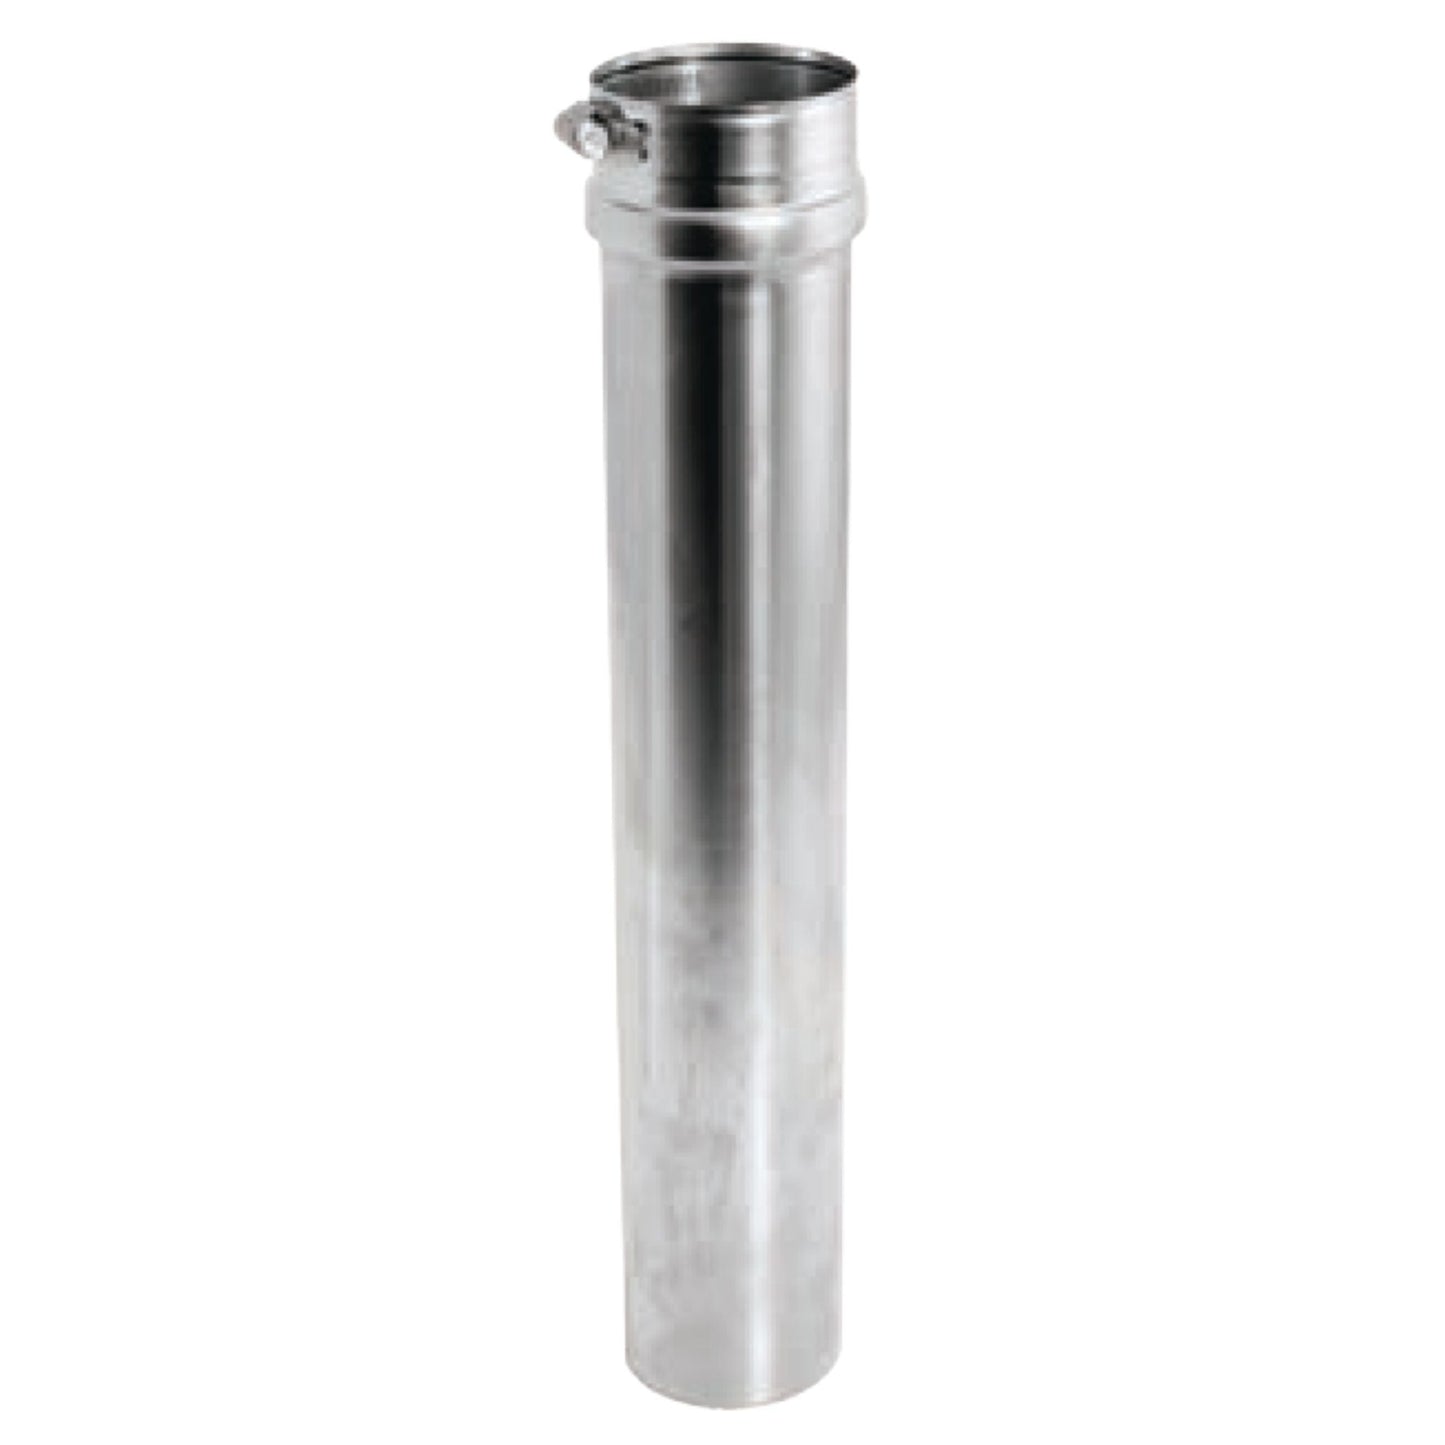 DuraVent FasNSeal 4" x 18" 316L Stainless Steel Adjustable Vent Length